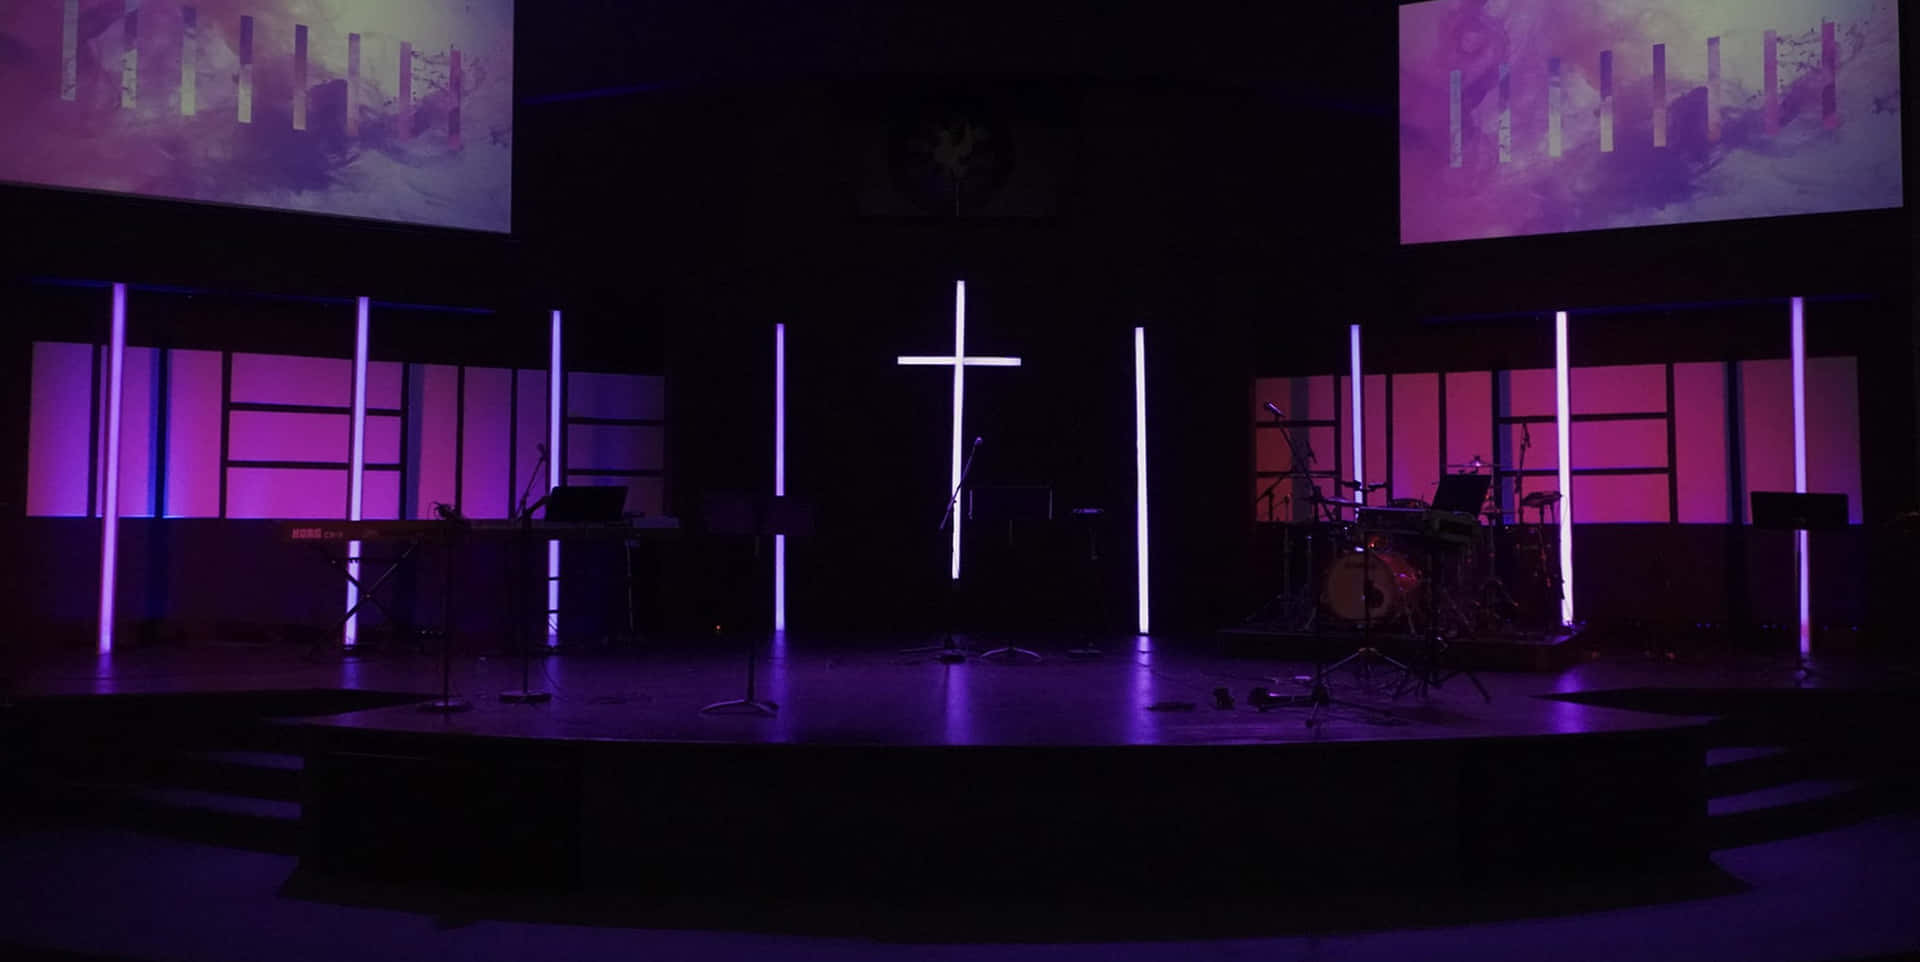 A vibrant lights and drawings on the stage of a church bring more life and beauty to the message being delivered.